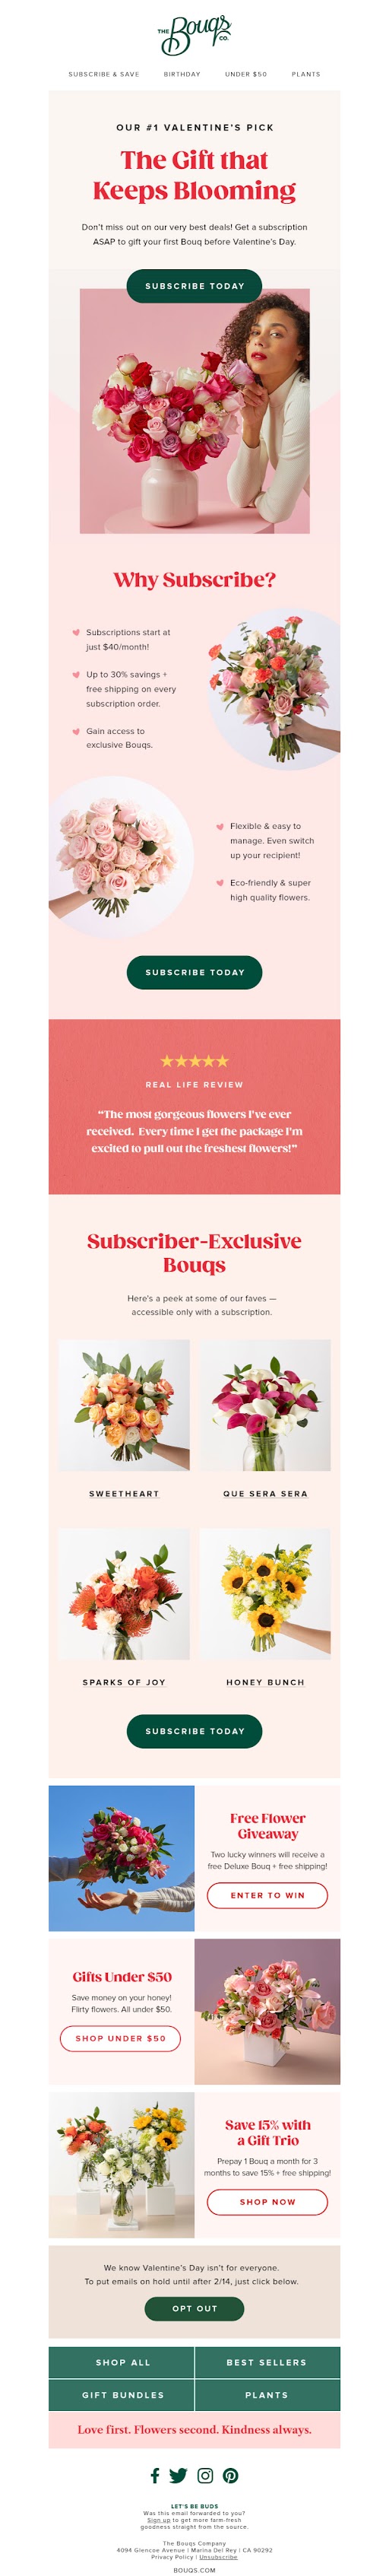 Bouqs Company- Valentine's email